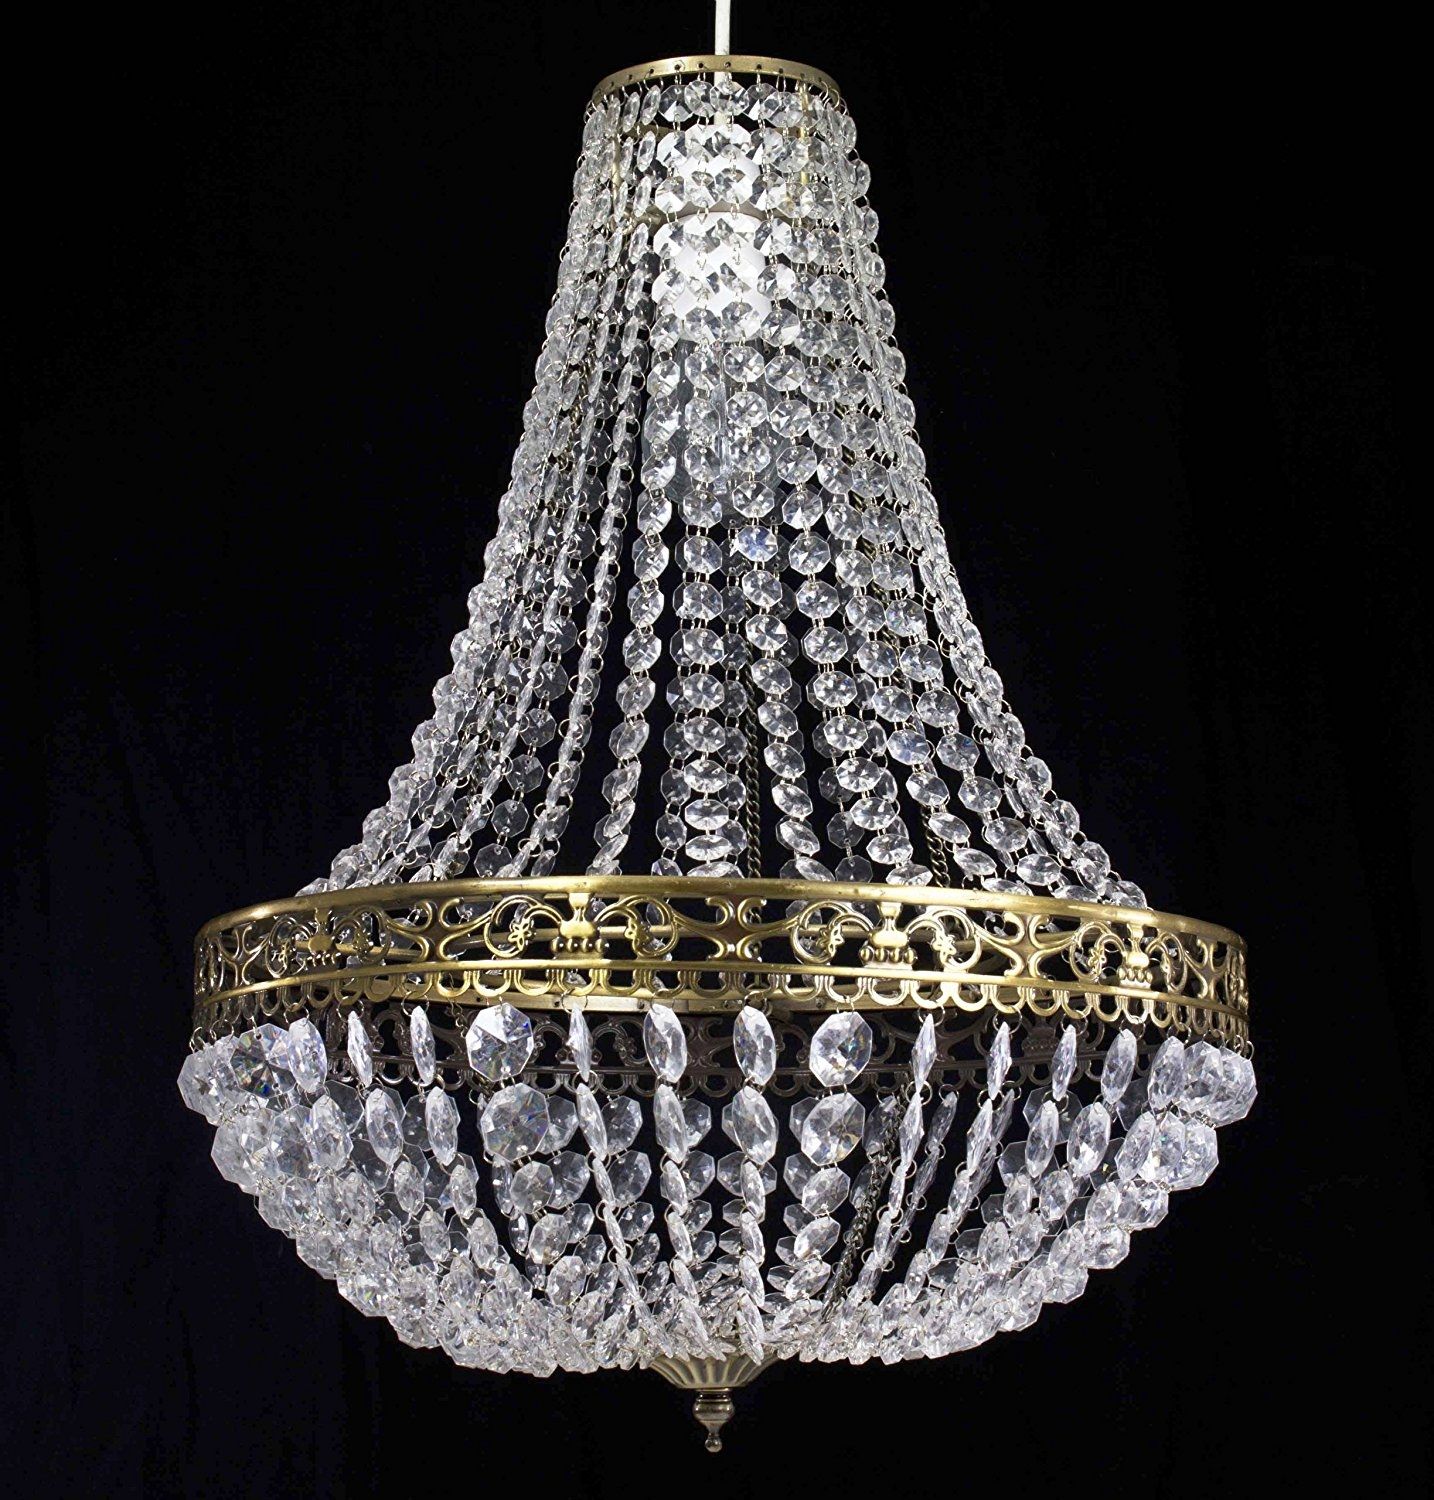 Chandelier Style Clear Acrylic Chrome Ceiling Light Shade Easy Fit Throughout Acrylic Chandelier Lighting (View 13 of 25)